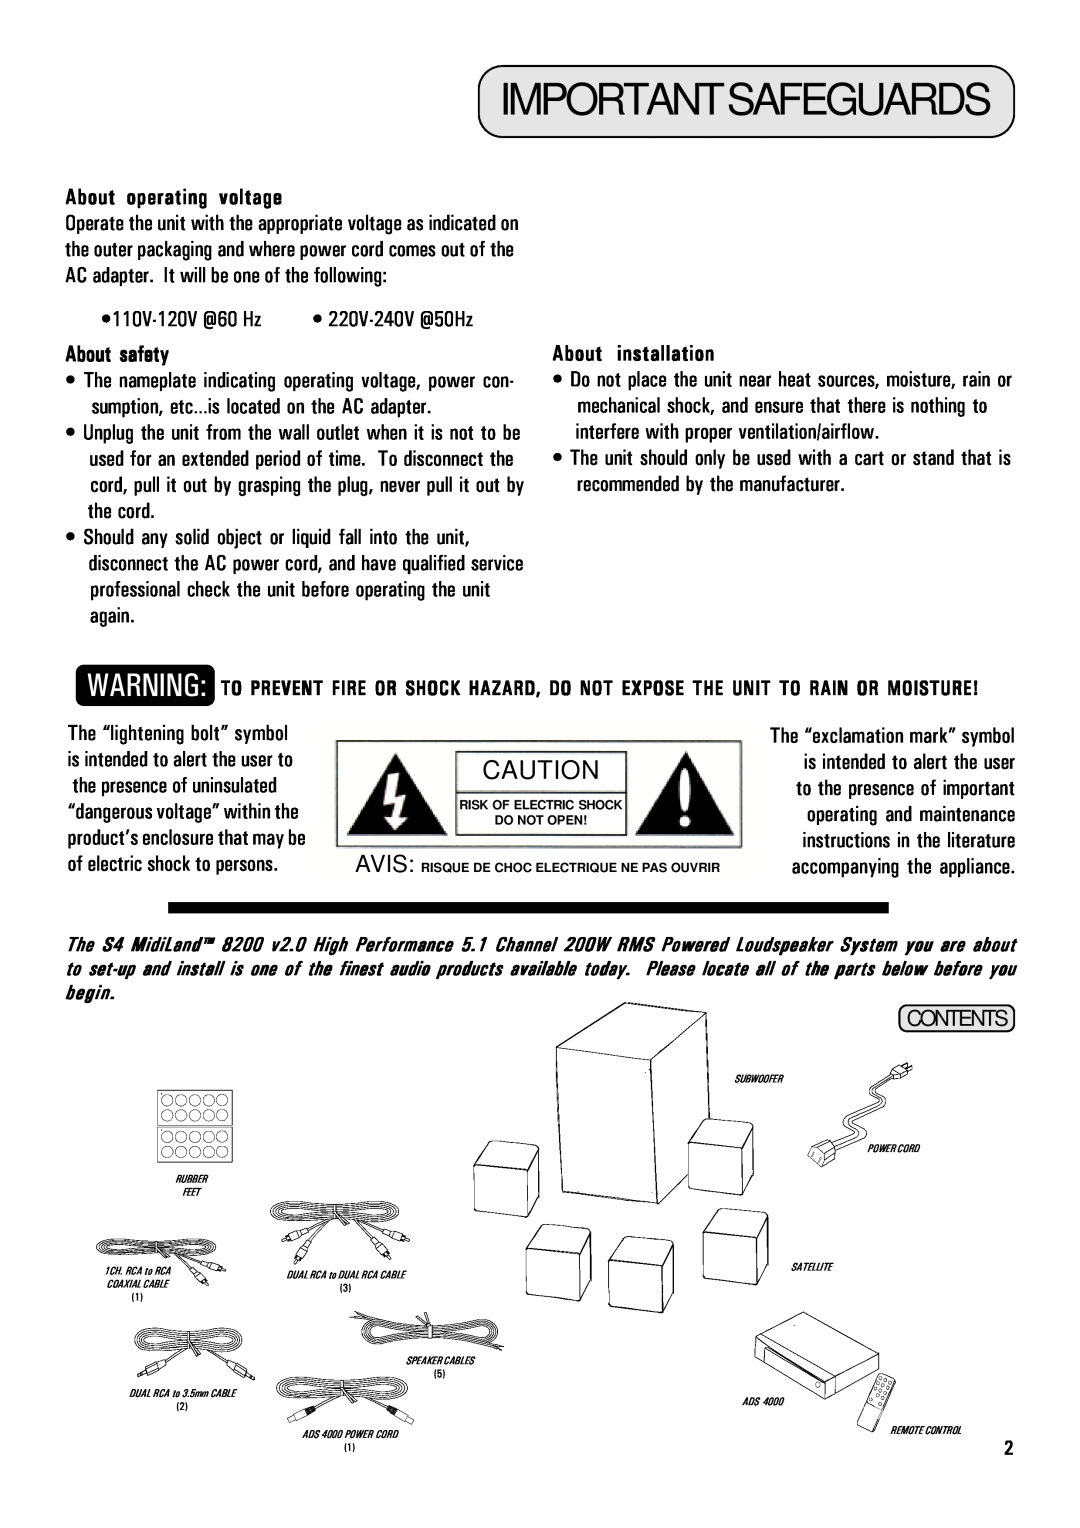 MidiLand 8200 owner manual Importantsafeguards, About operating voltage, About safety, About installation 